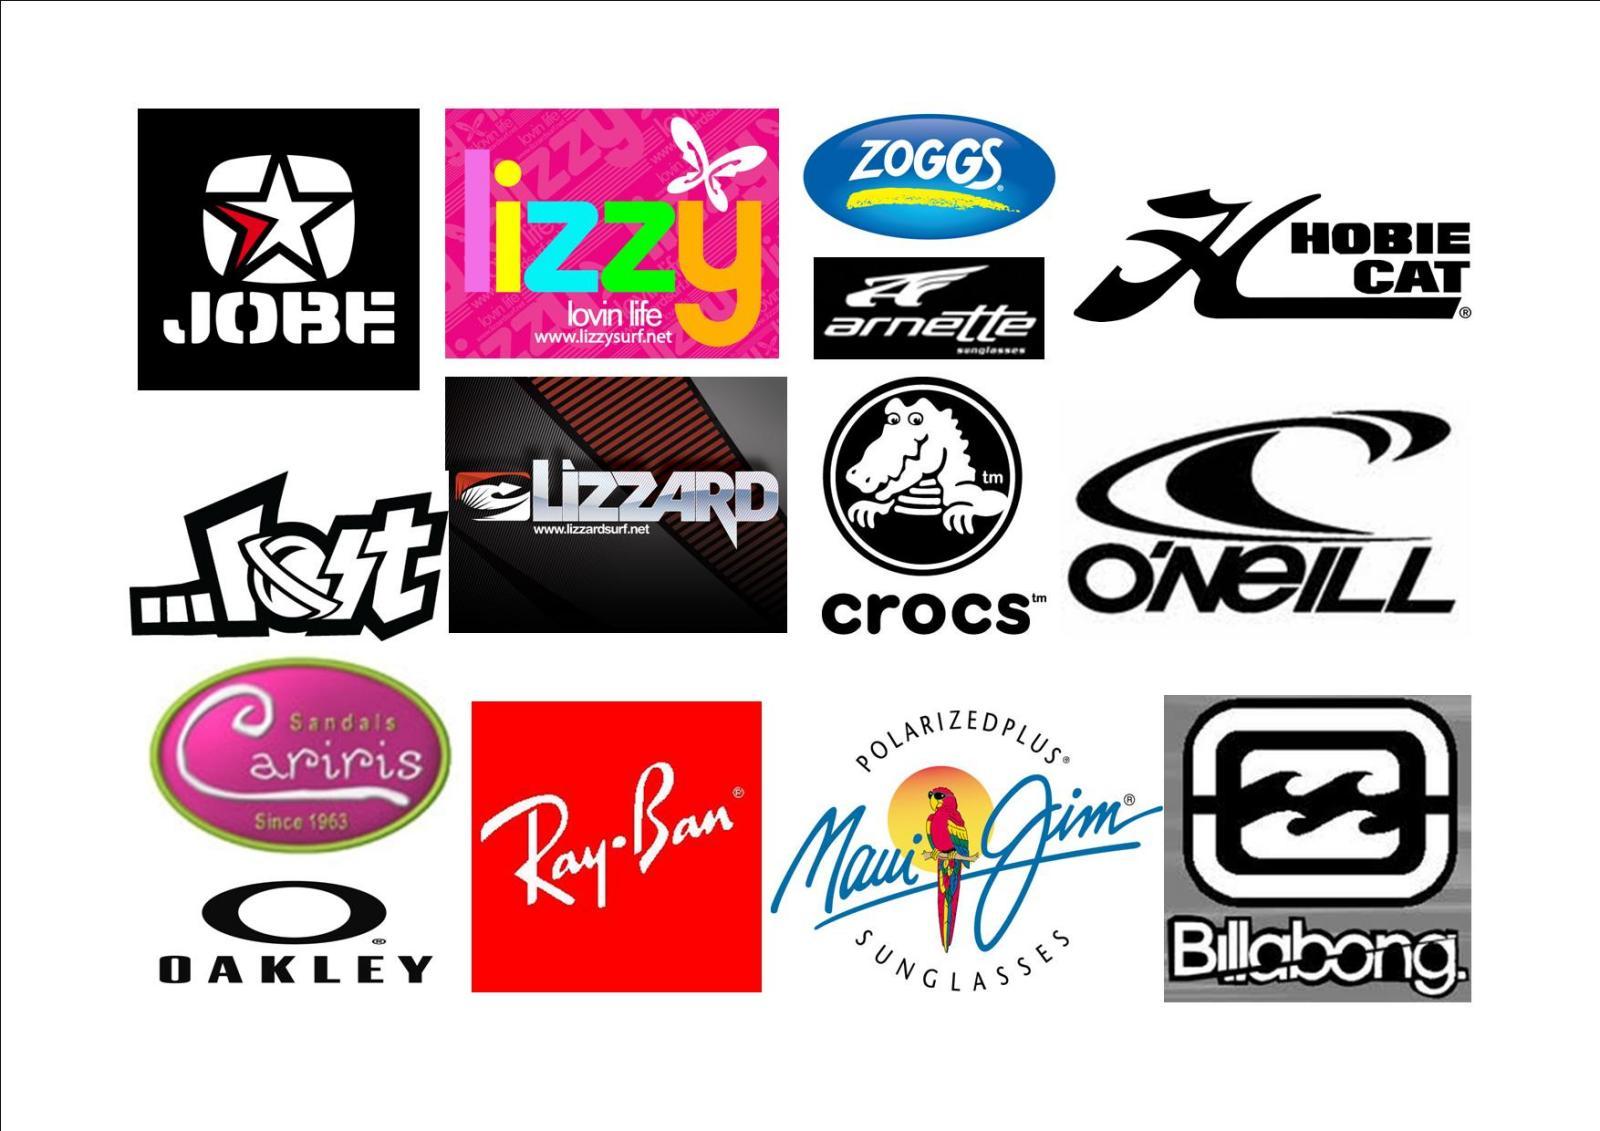 Well Known Clothing Logo - Well Known Logos And Names | www.topsimages.com